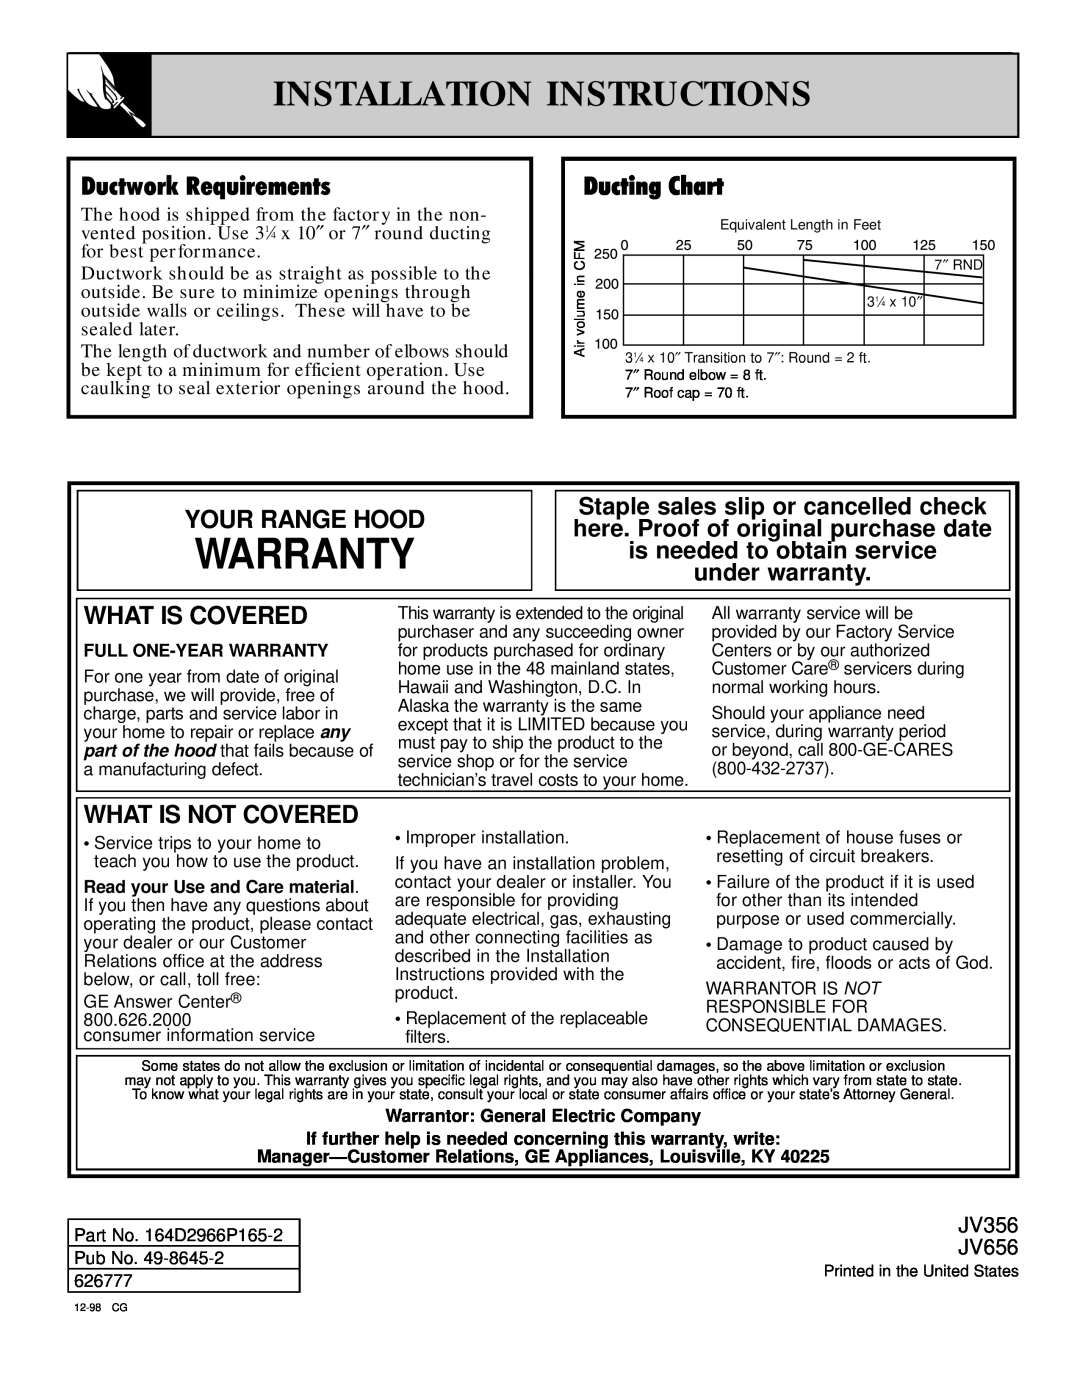 GE JV356 30 Ductwork Requirements, Ducting Chart, Warranty, Installation Instructions, Your Range Hood, What Is Covered 